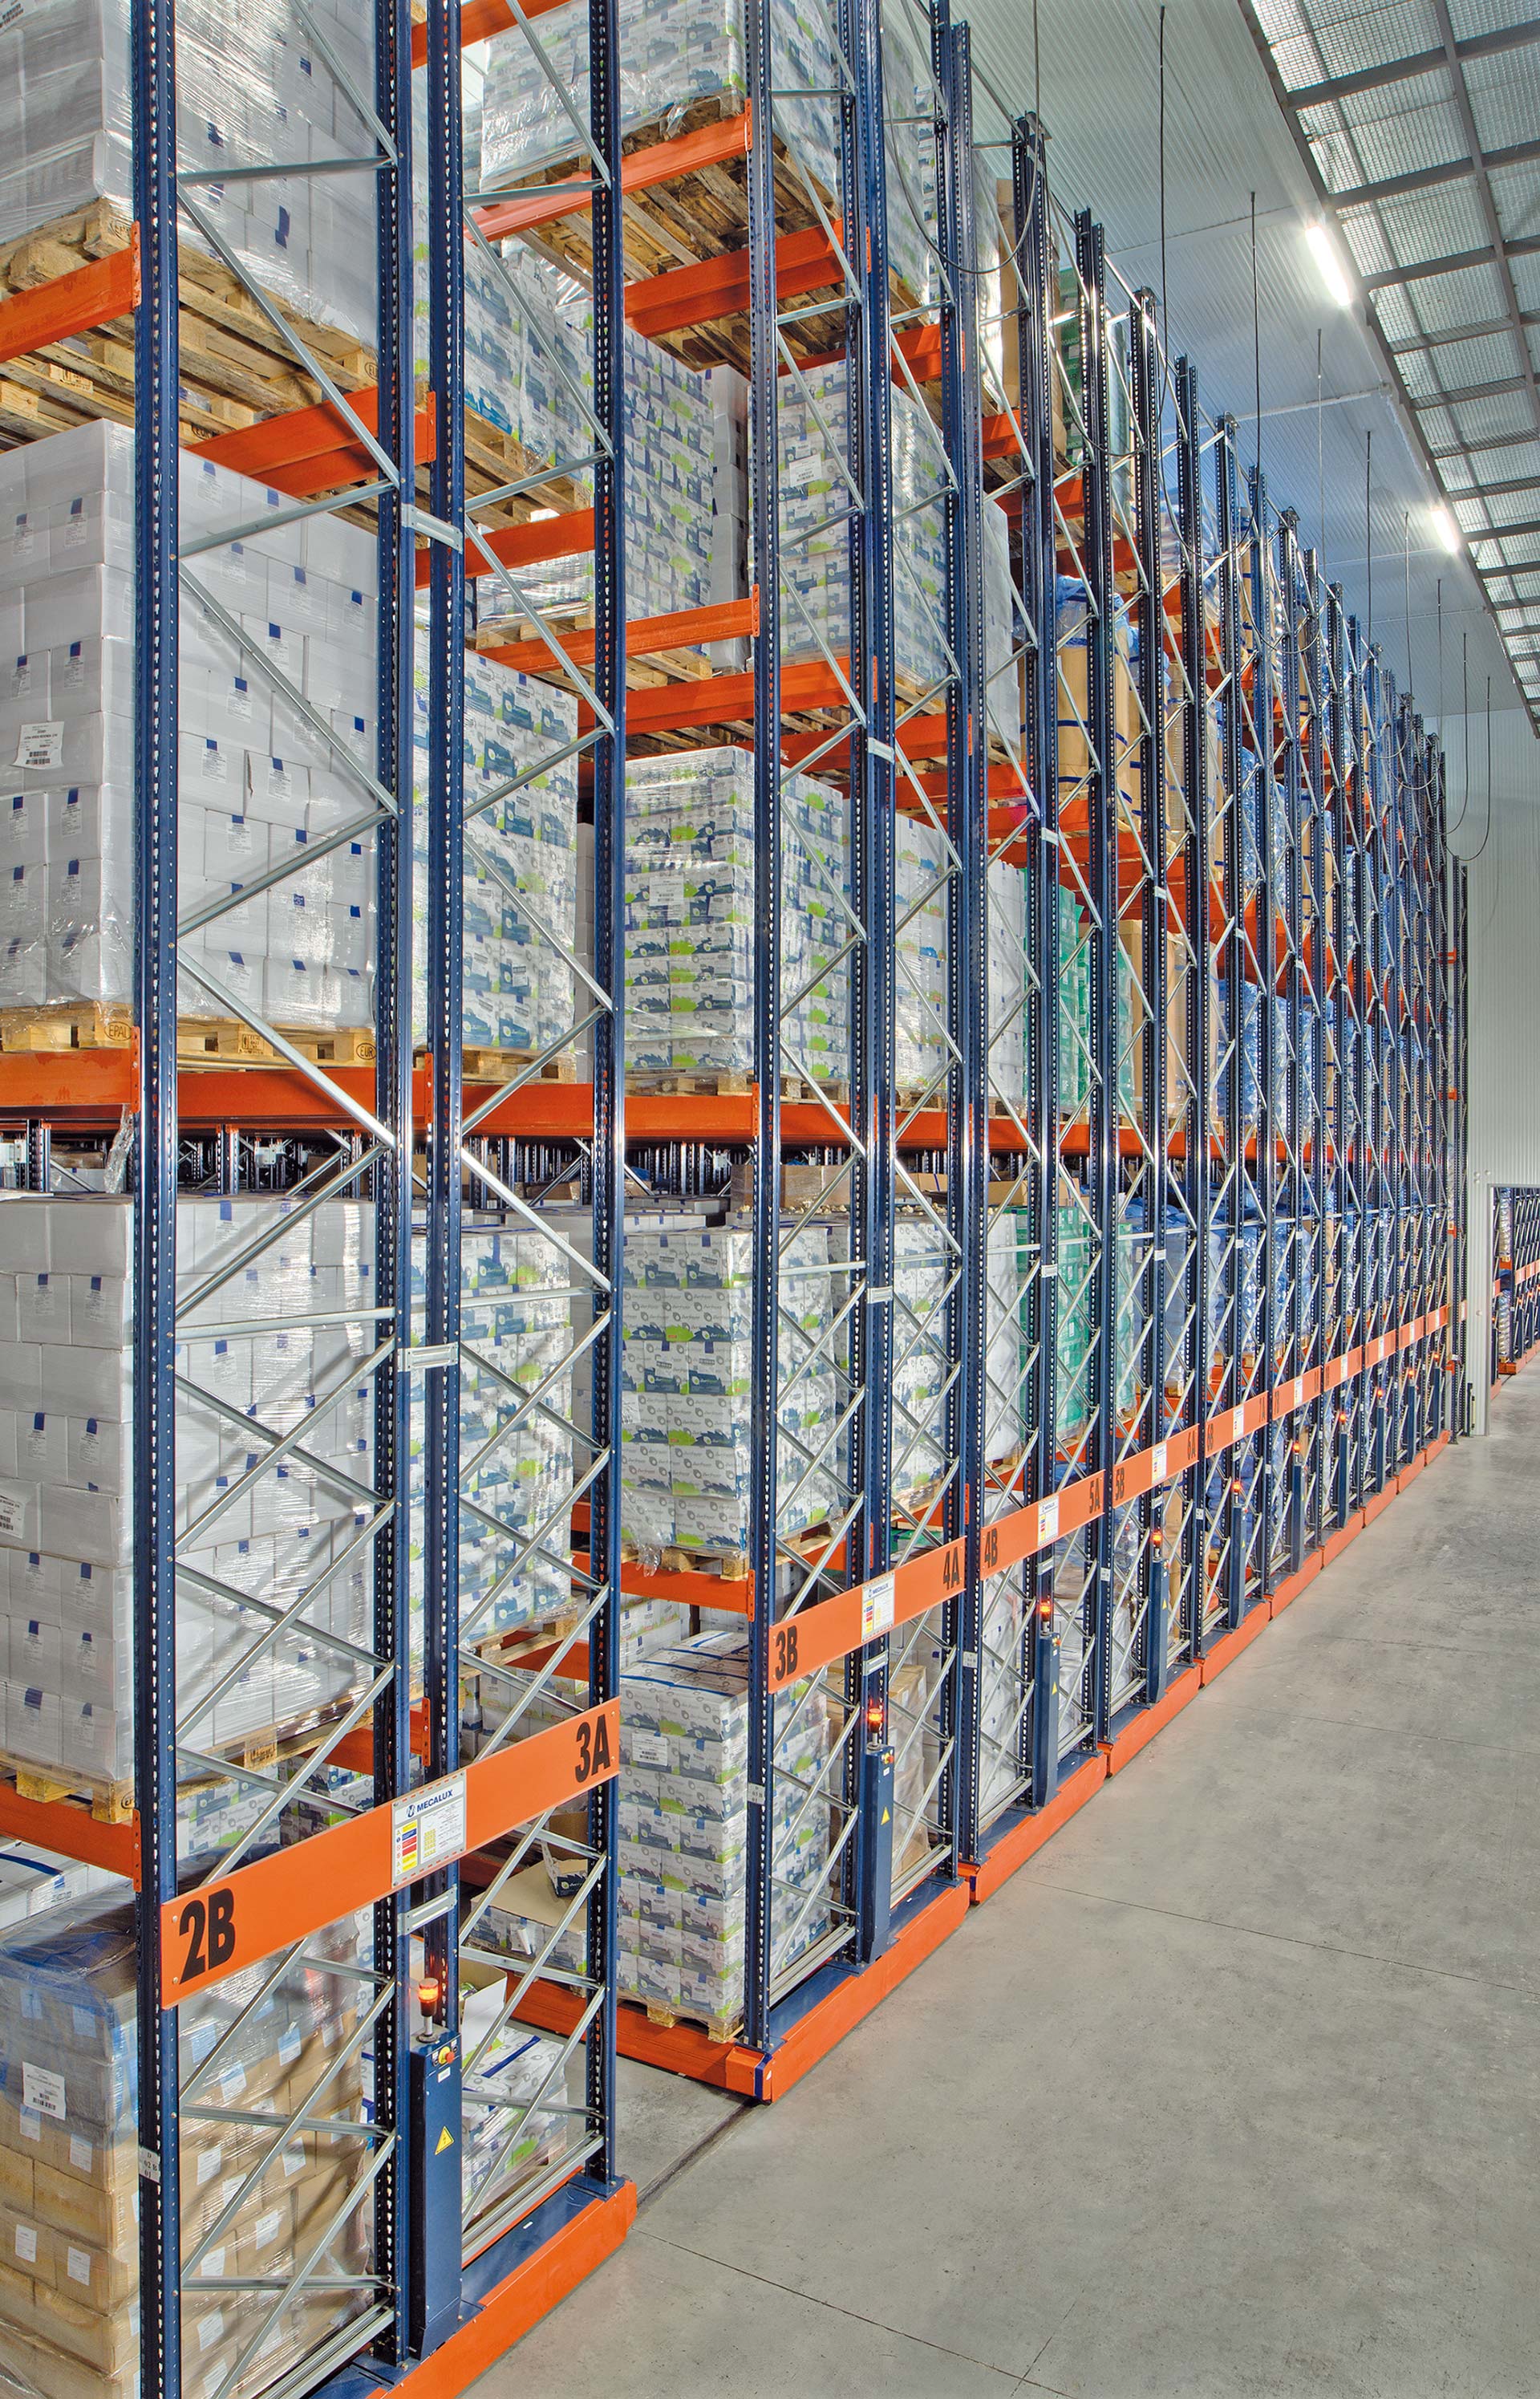 This system can be adapted to warehouses with more levels to optimize the load capacity